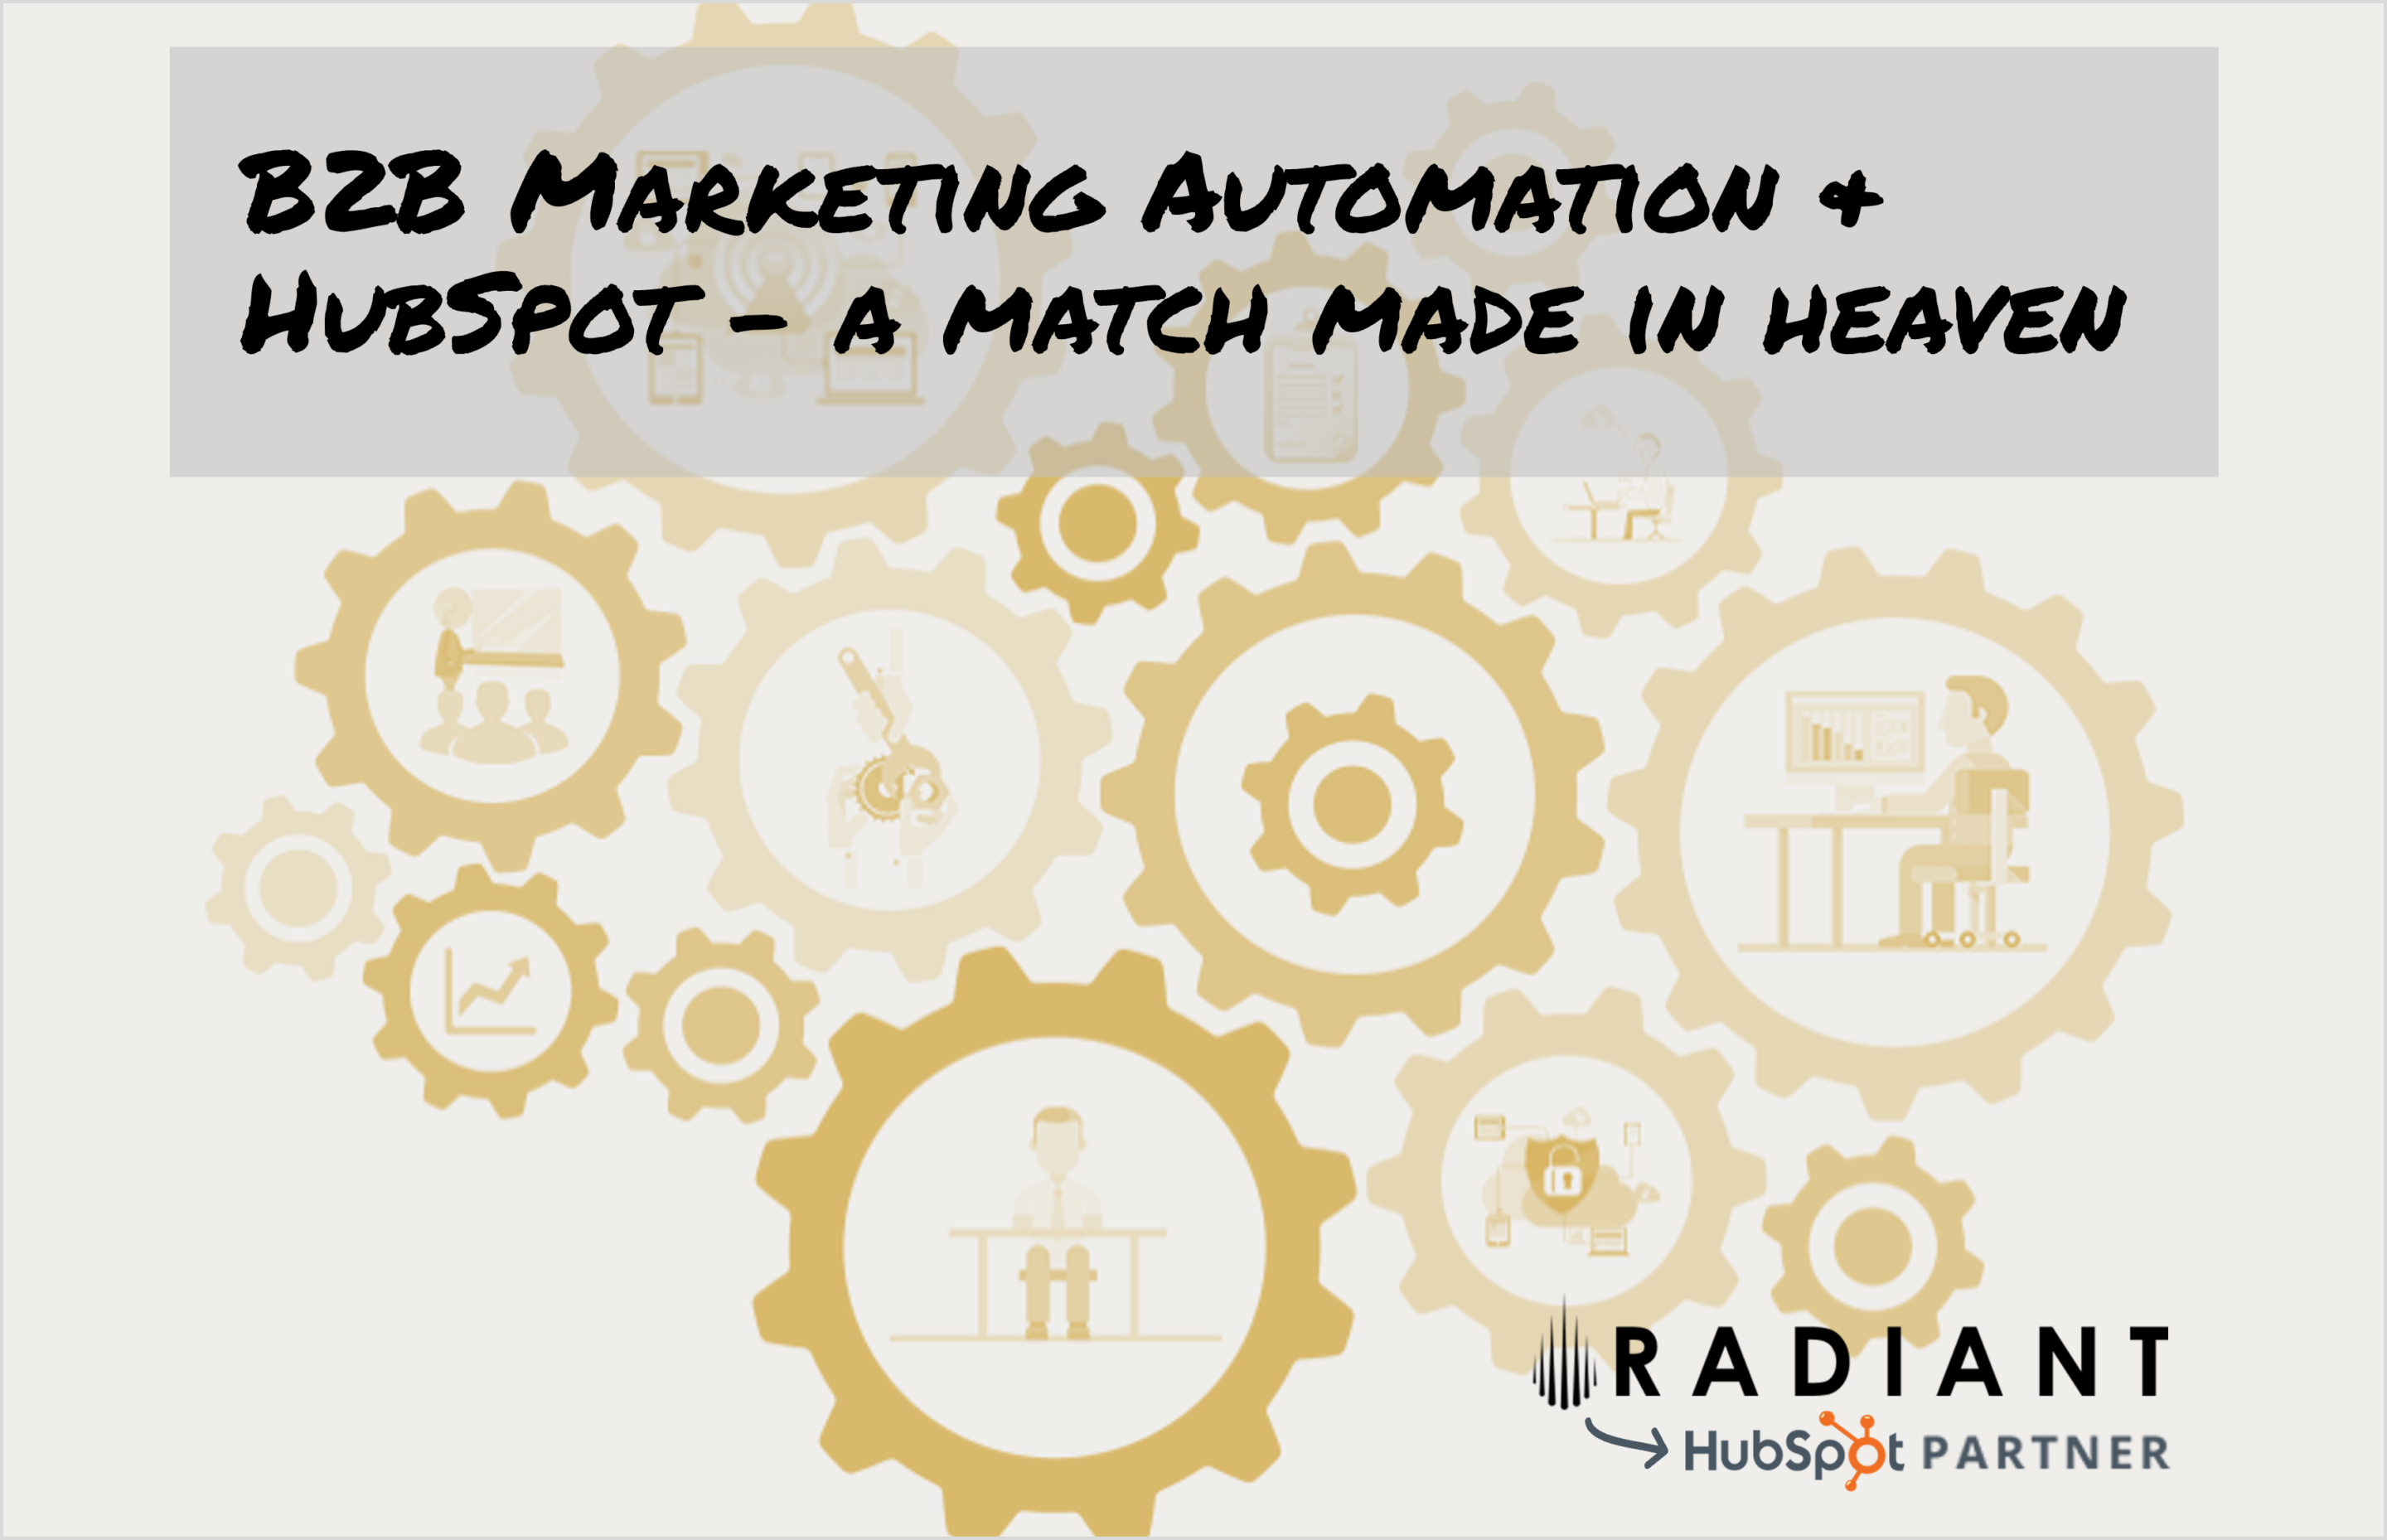 Want to get ahead of the competition when converting visitors to leads? We'll teach you successful B2B marketing automation with HubSpot.